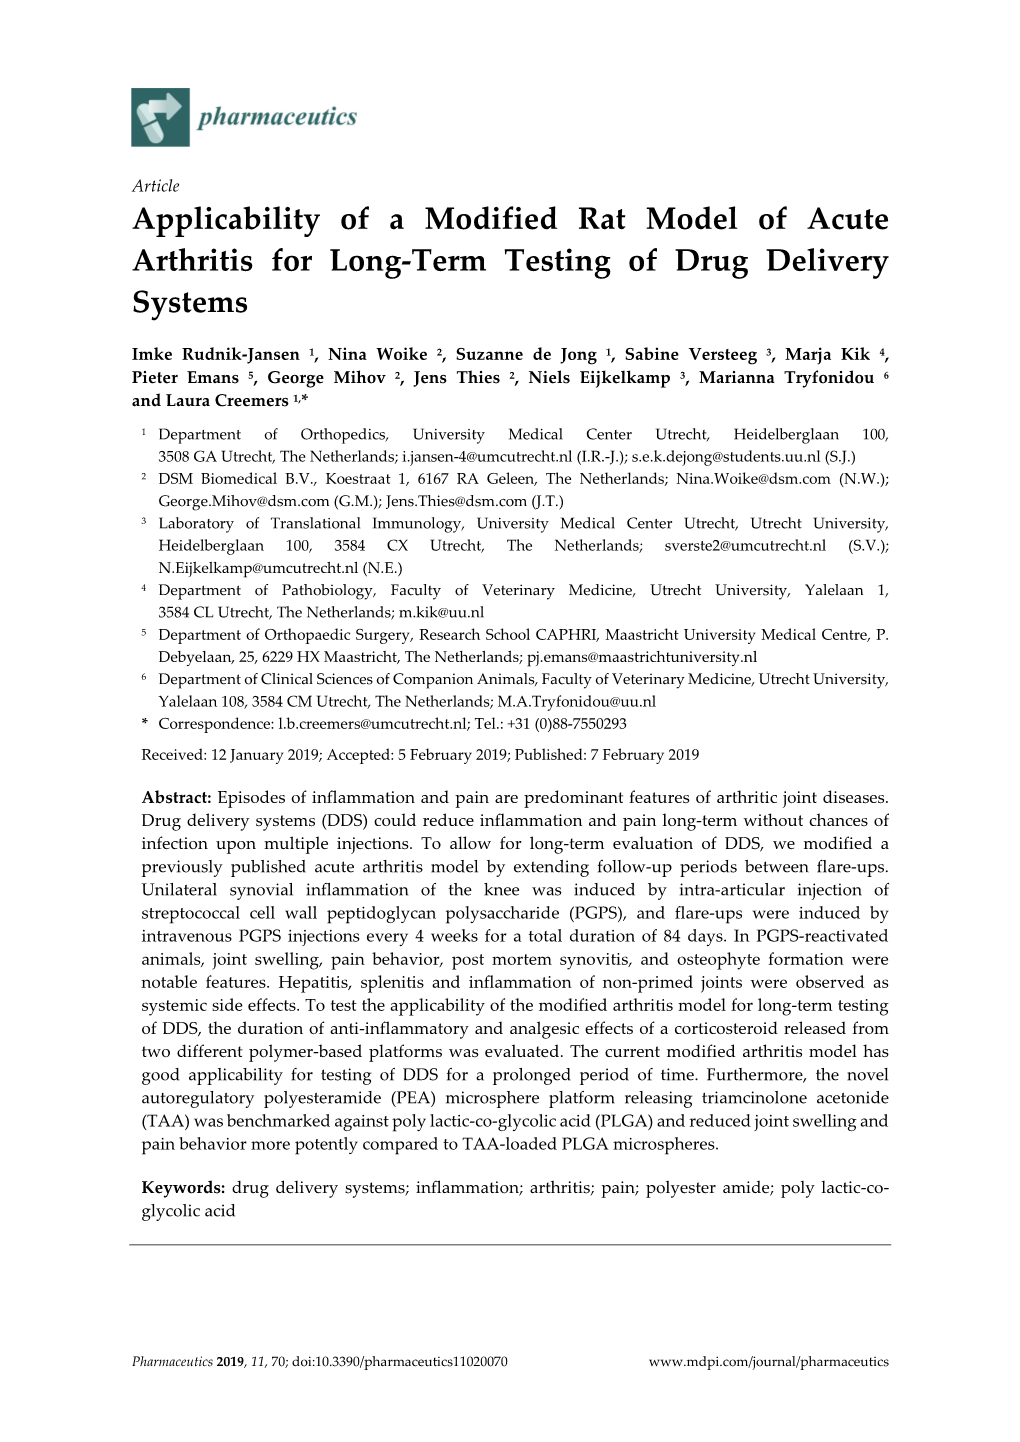 Applicability of a Modified Rat Model of Acute Arthritis for Long-Term Testing of Drug Delivery Systems